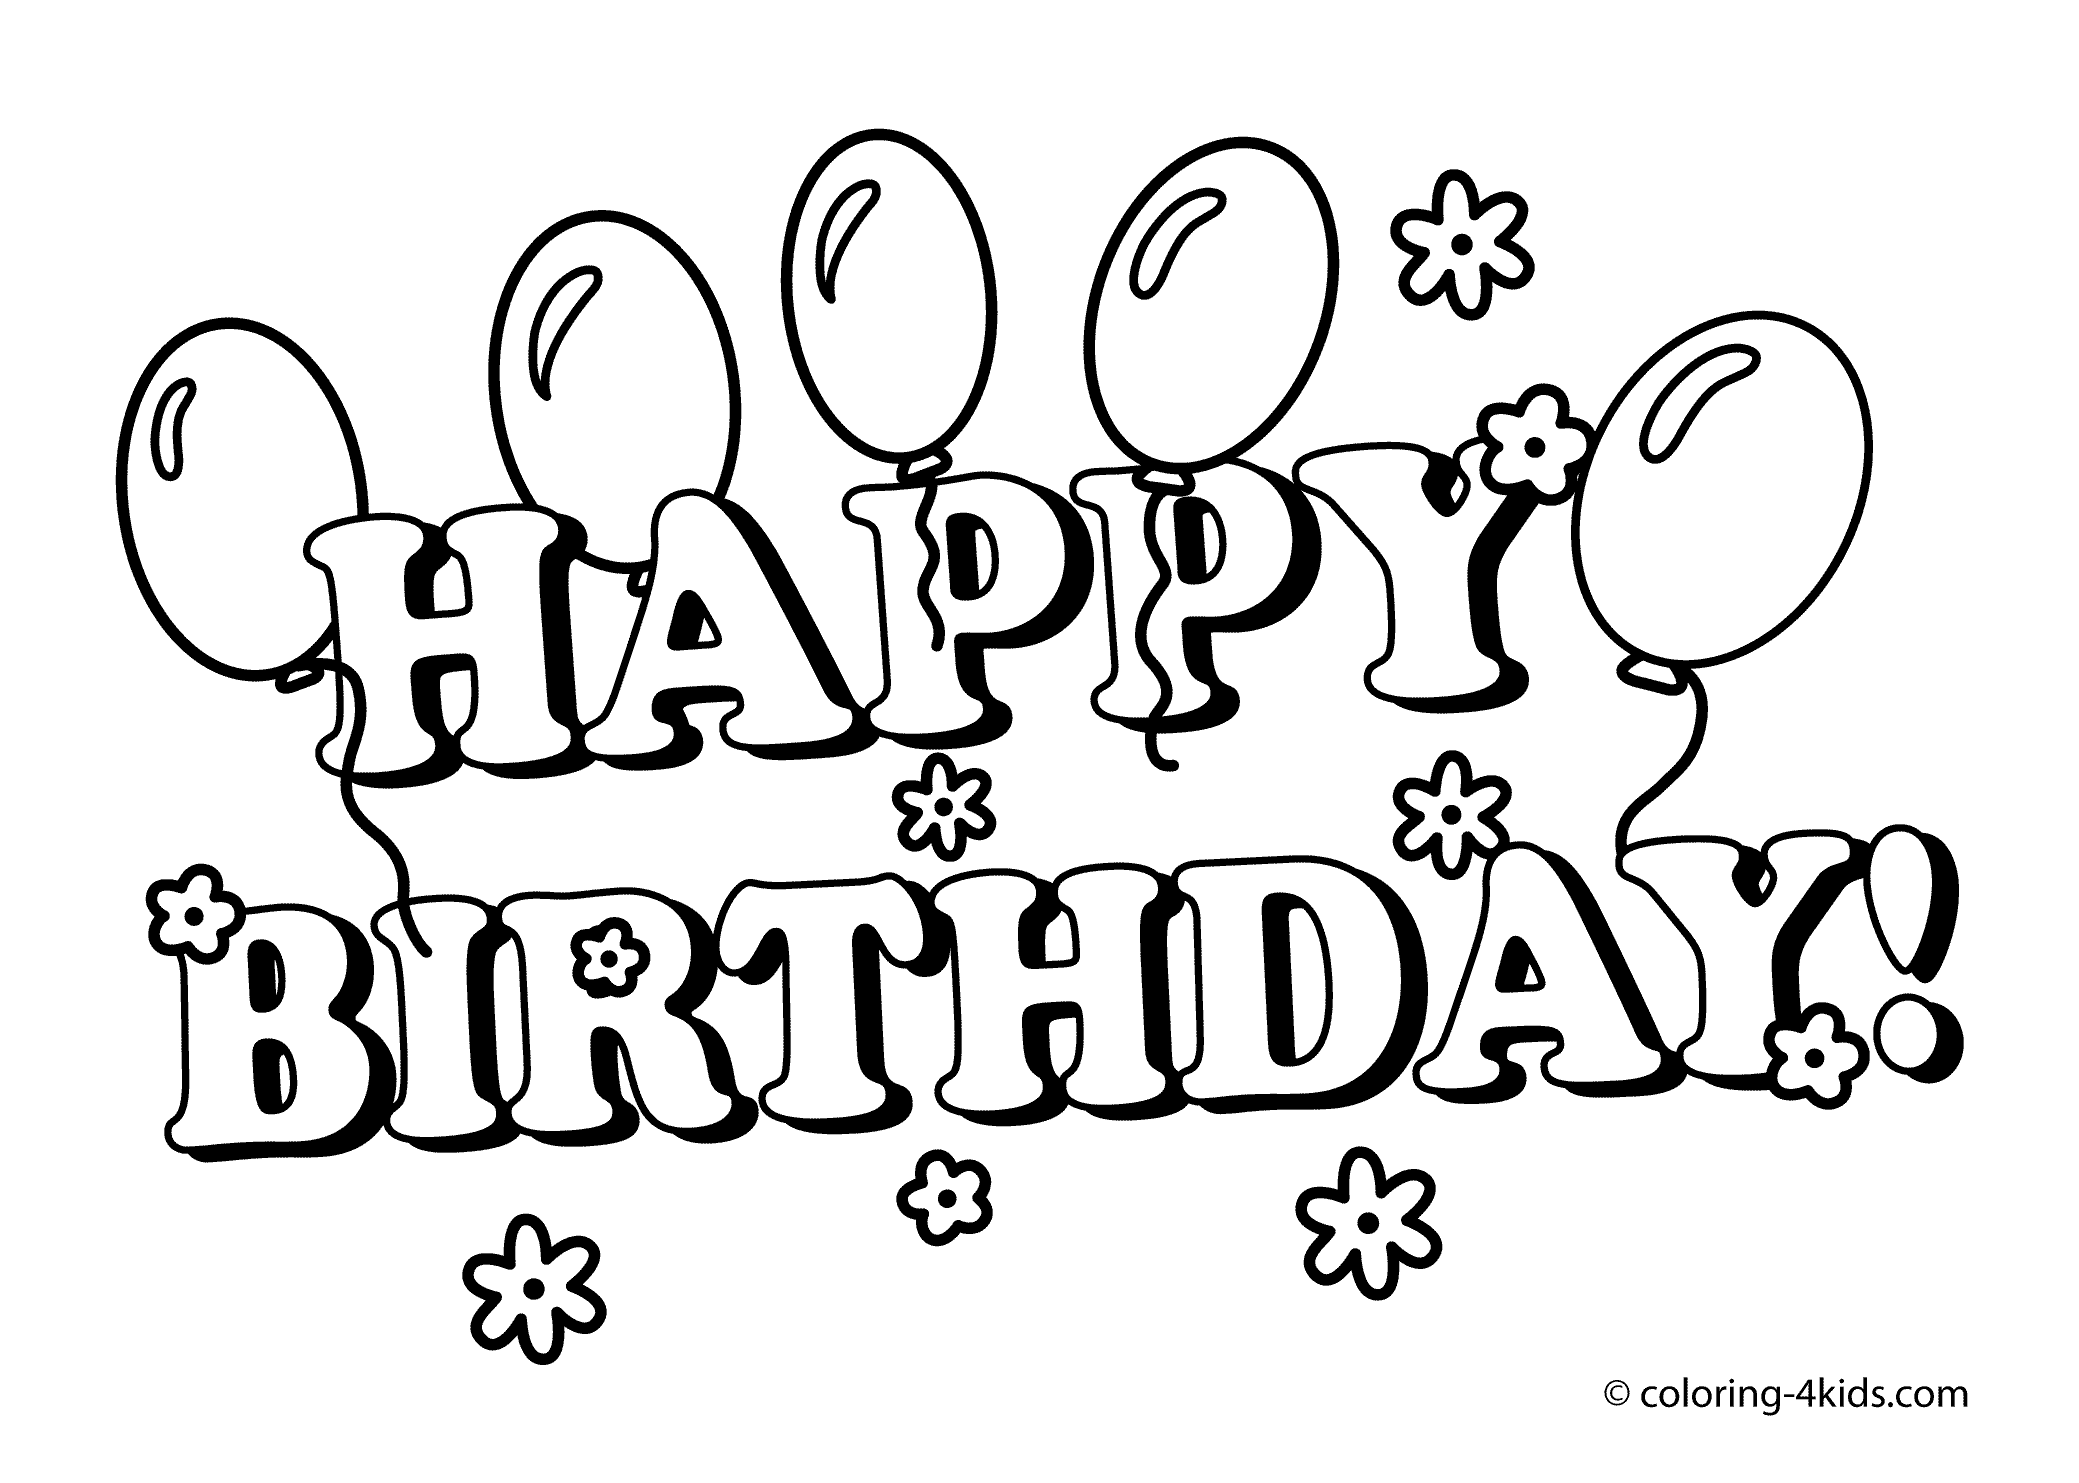 Happy birthday coloring pages to download and print for free